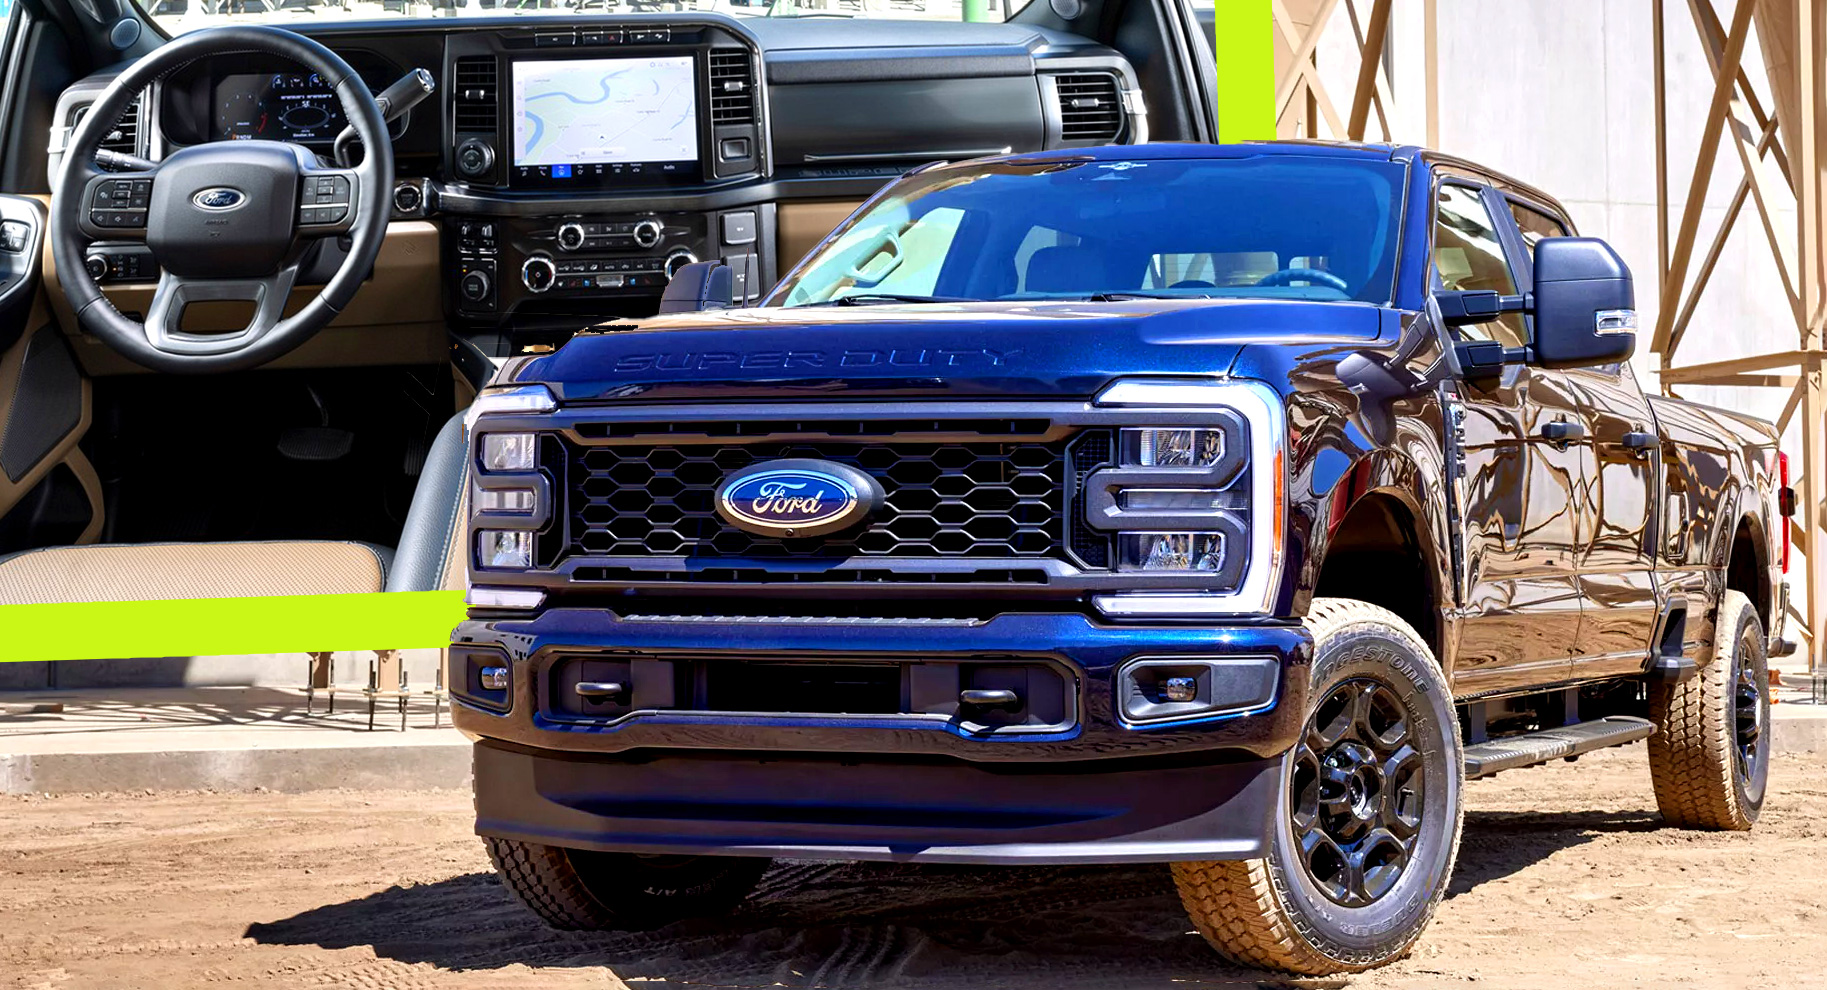 Built Ford Tough®: Discover Our Most Powerful, Rugged Trucks - QUALITY  GREEN SAFE SMART